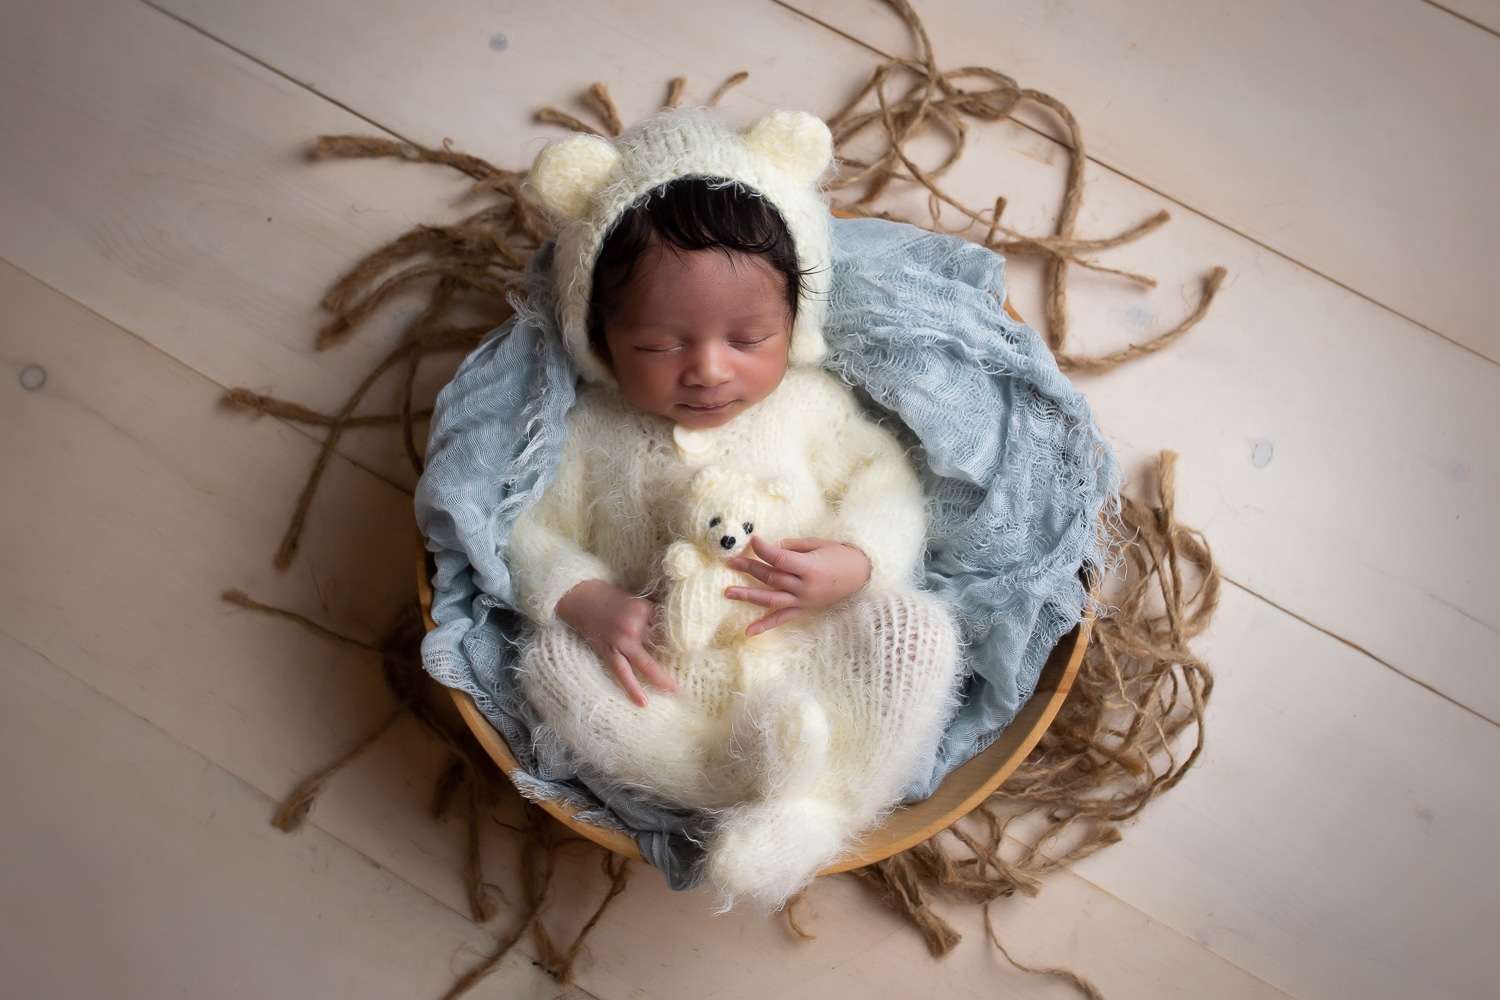 newborn photographer in rochester ny captures newborn baby boy sleeping in teddy bear outfit